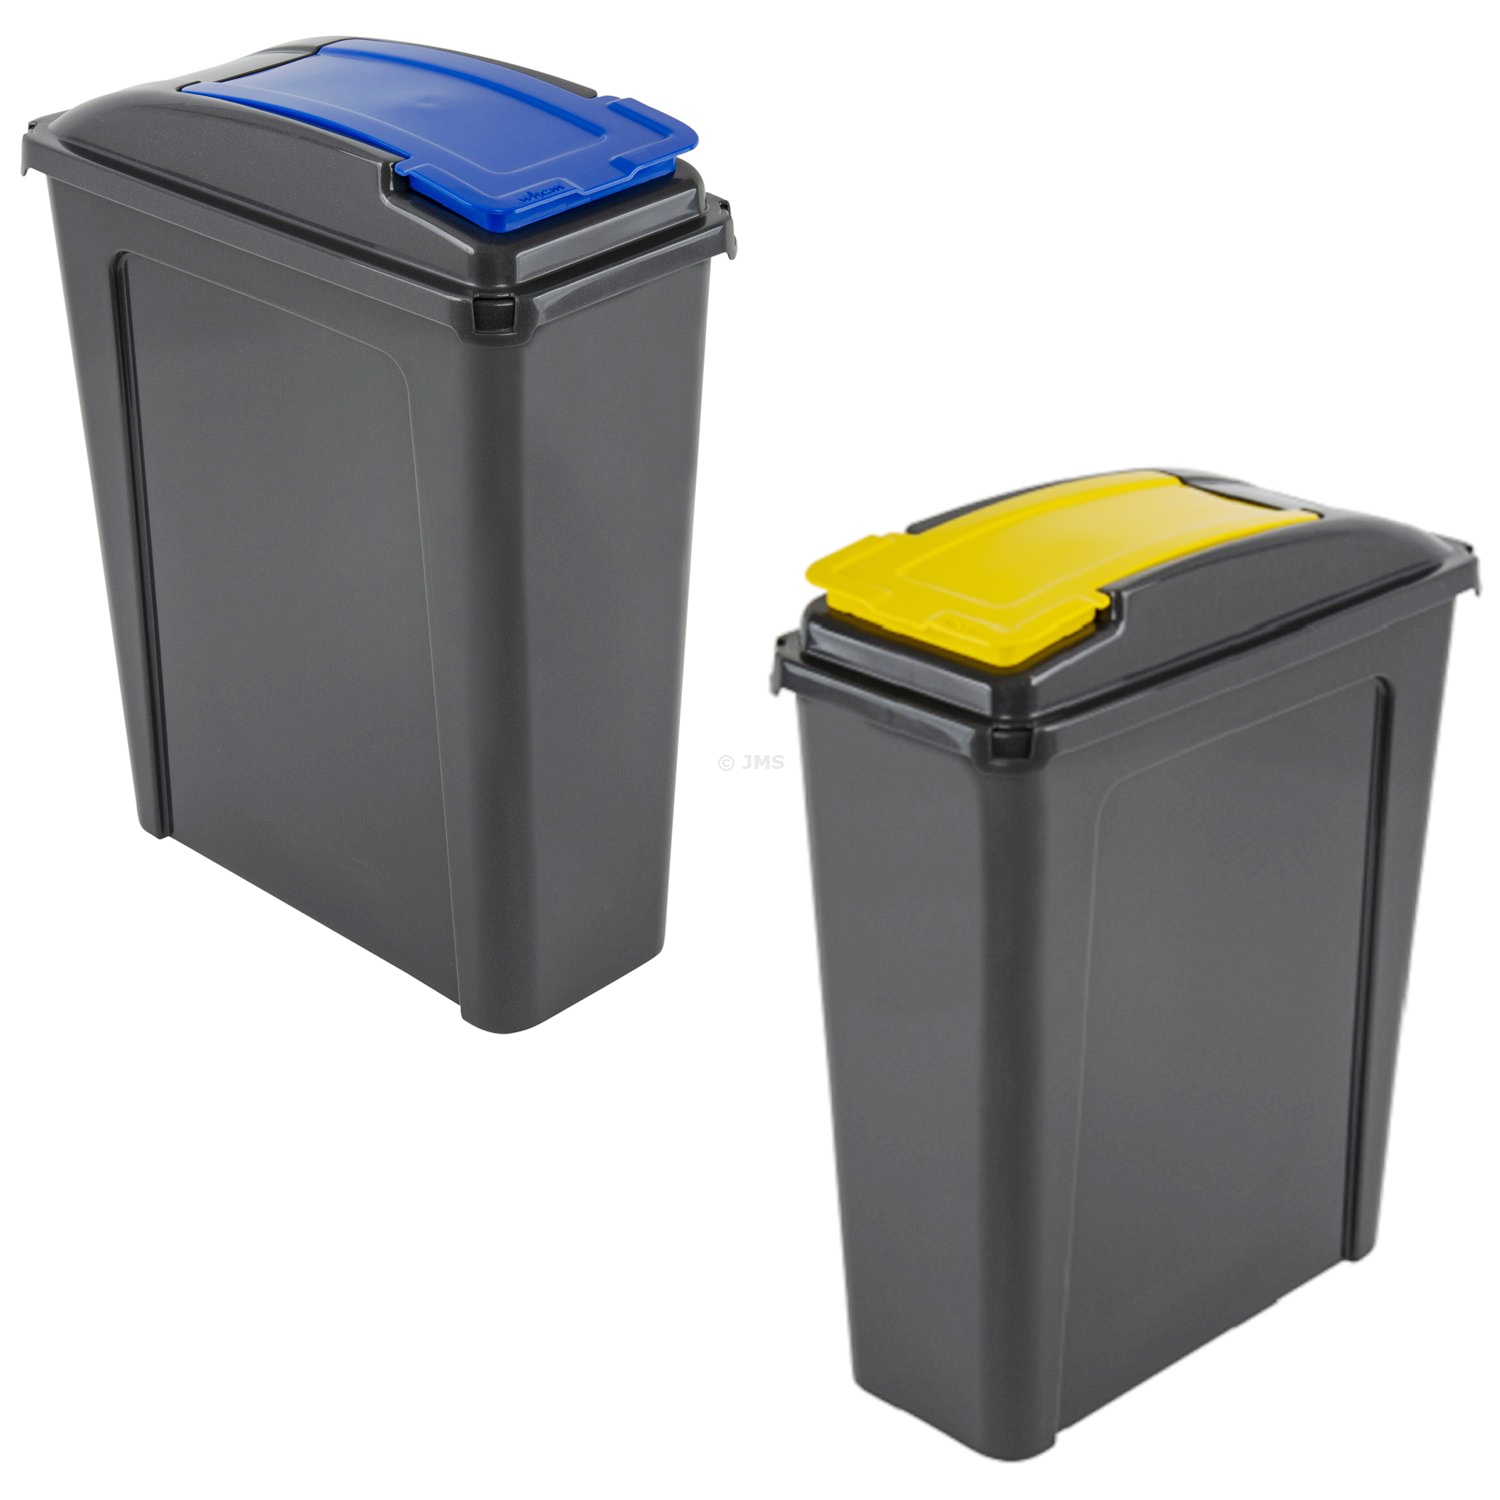 Plastic Recycle It 25L Slimline Bin & Lid BLUE + YELLOW Waste Recycling Dustbin Multi-purpose Storage Container Home Kitchen Garden